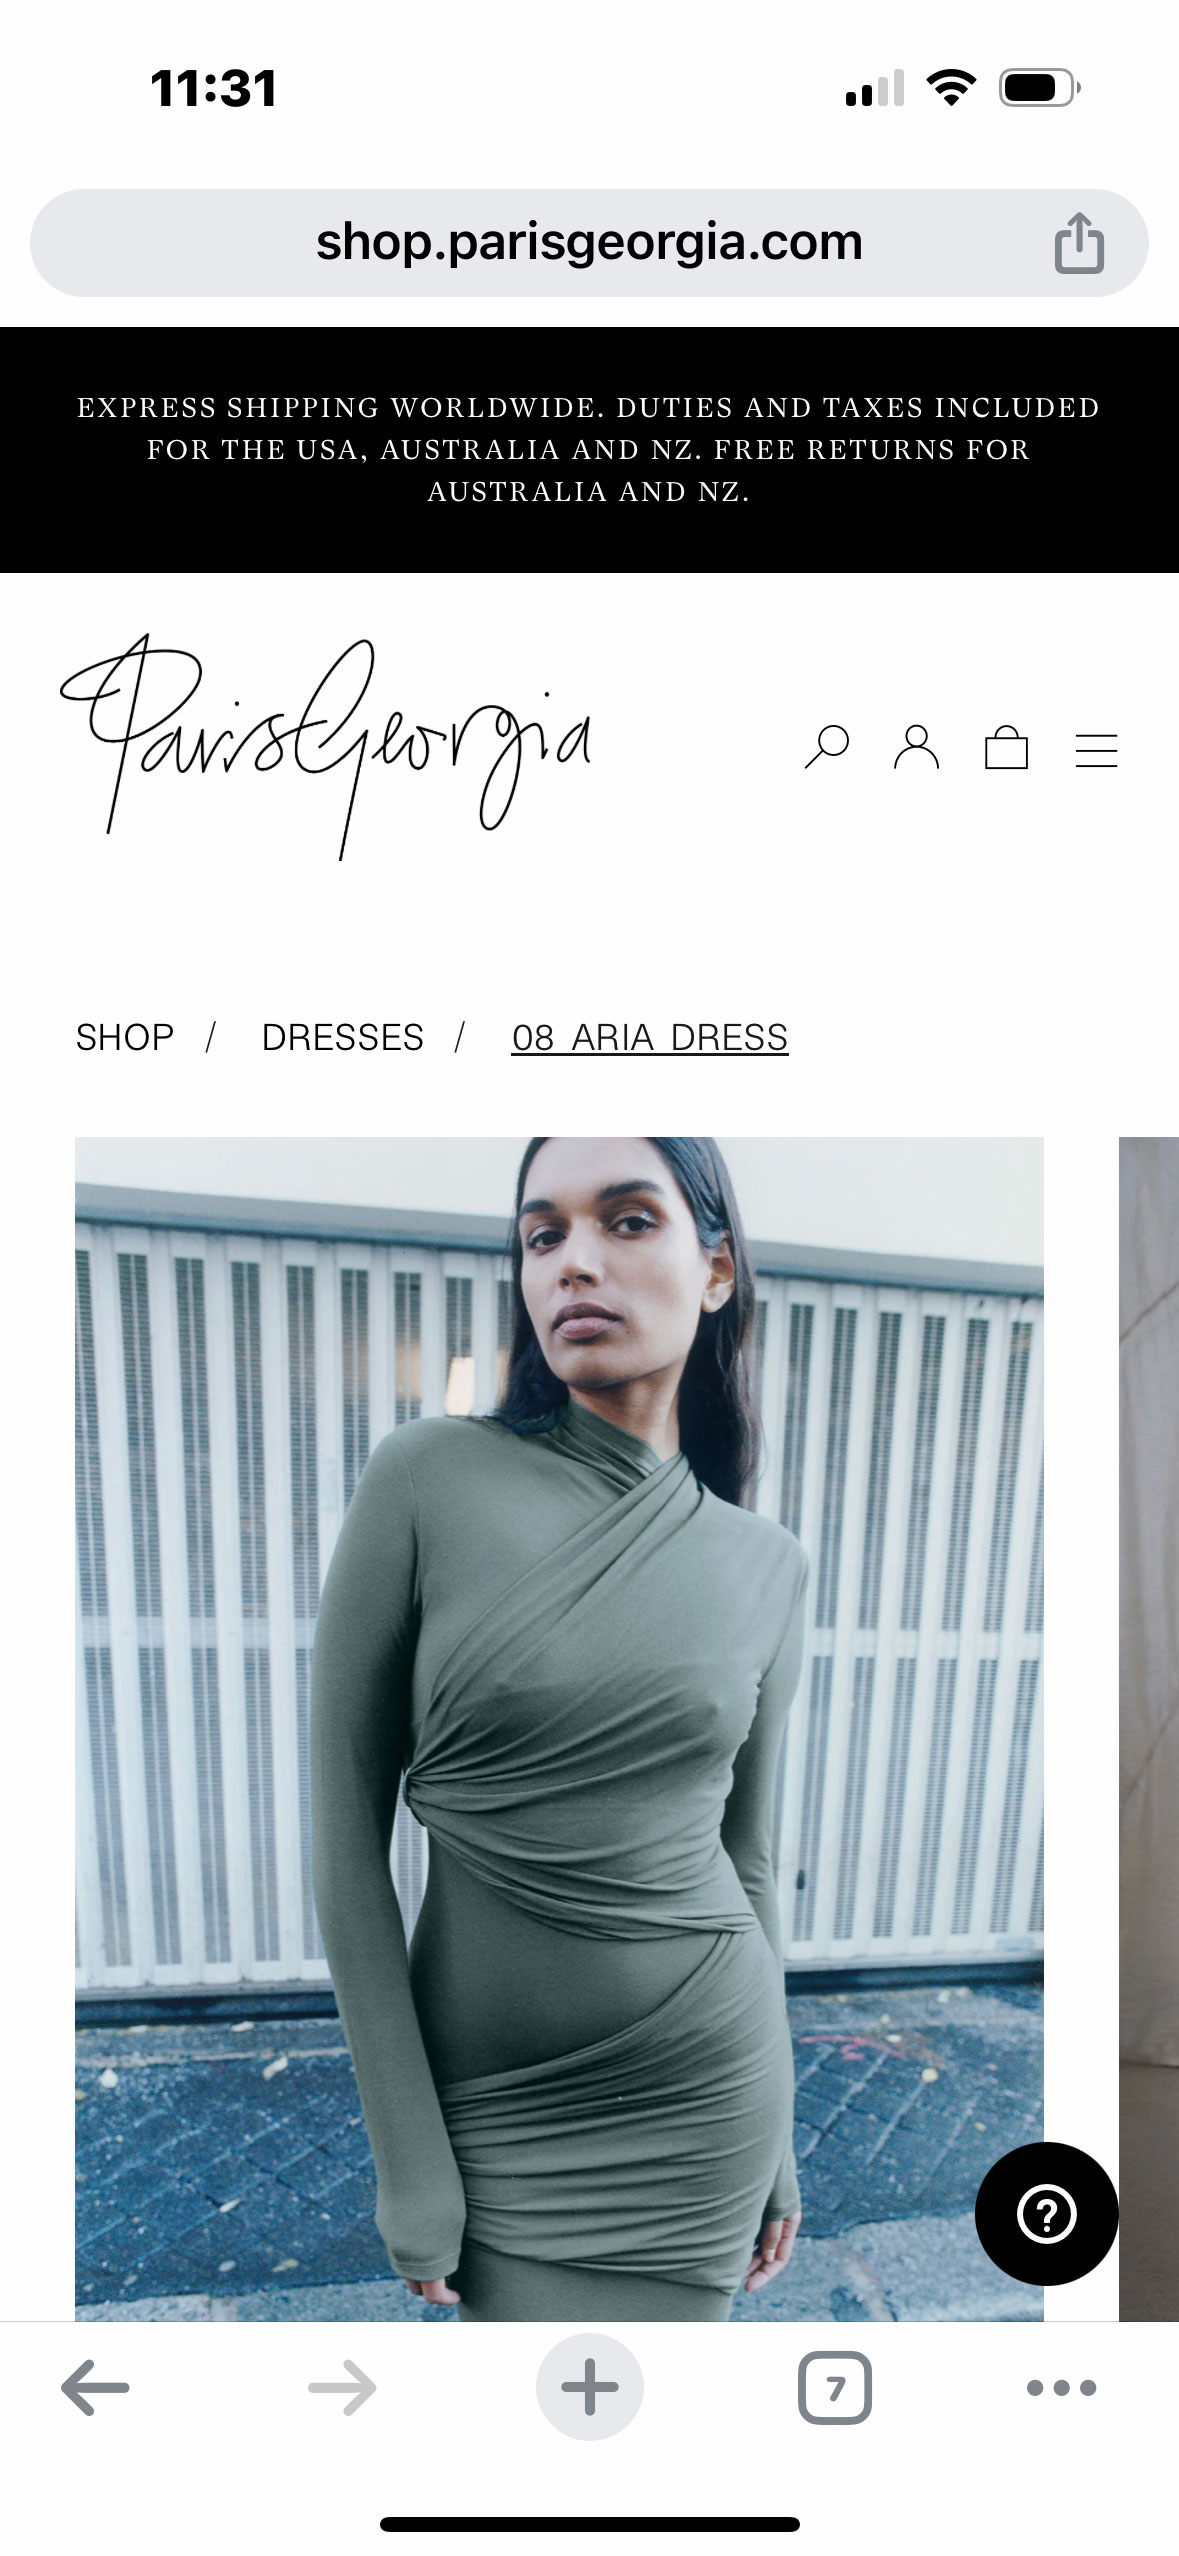 Adriano Orlando does the development for Paris Georgia with Meide Engineering. 08 Aria Dress in Sicilian Olive product page screenshot.